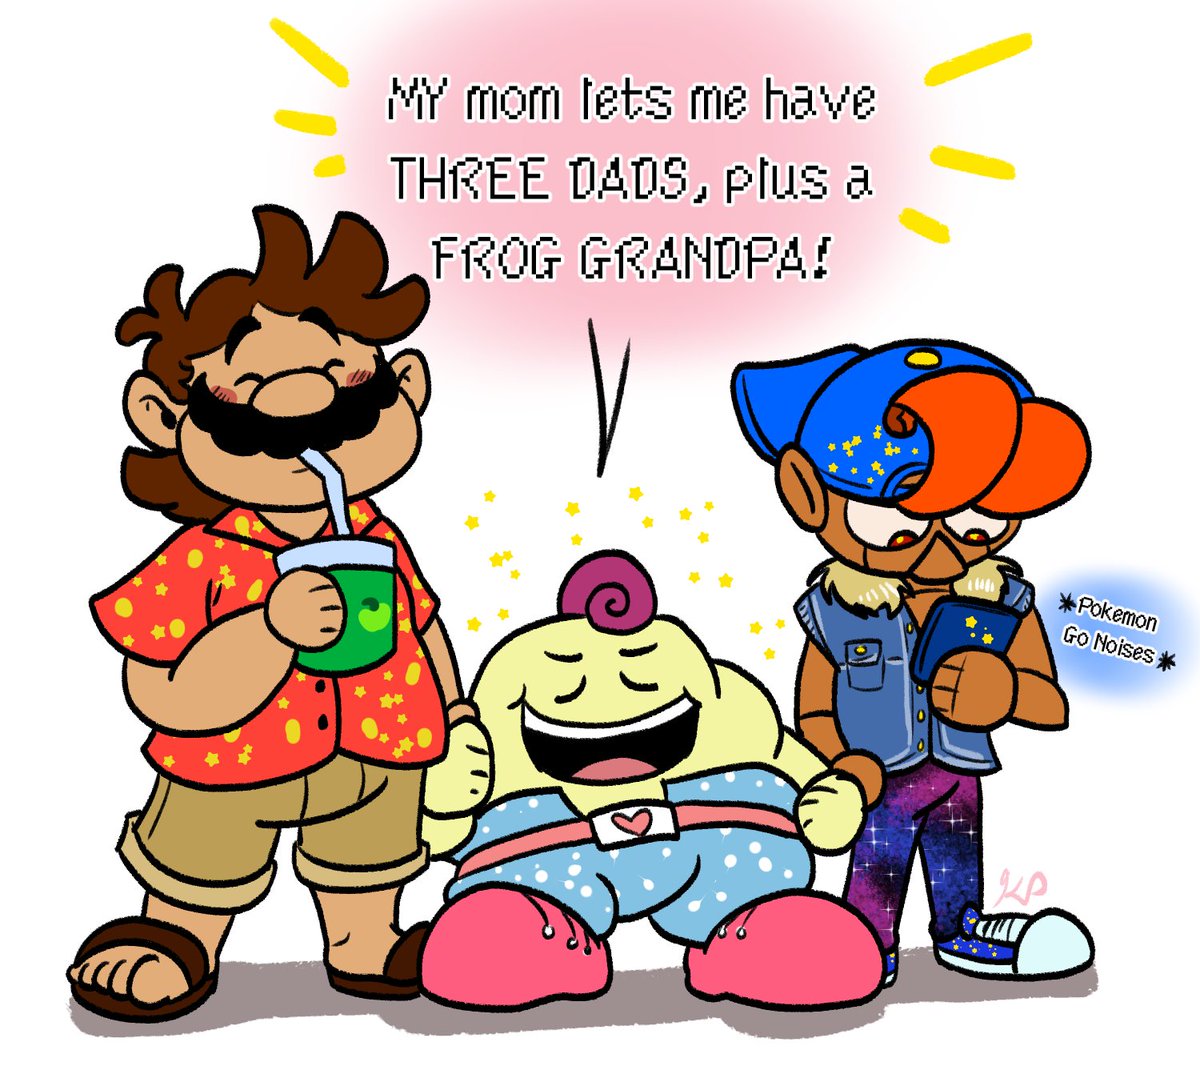 Mallow and two of his Dads hang out for the day!
#SuperMarioRPG #SMRPG